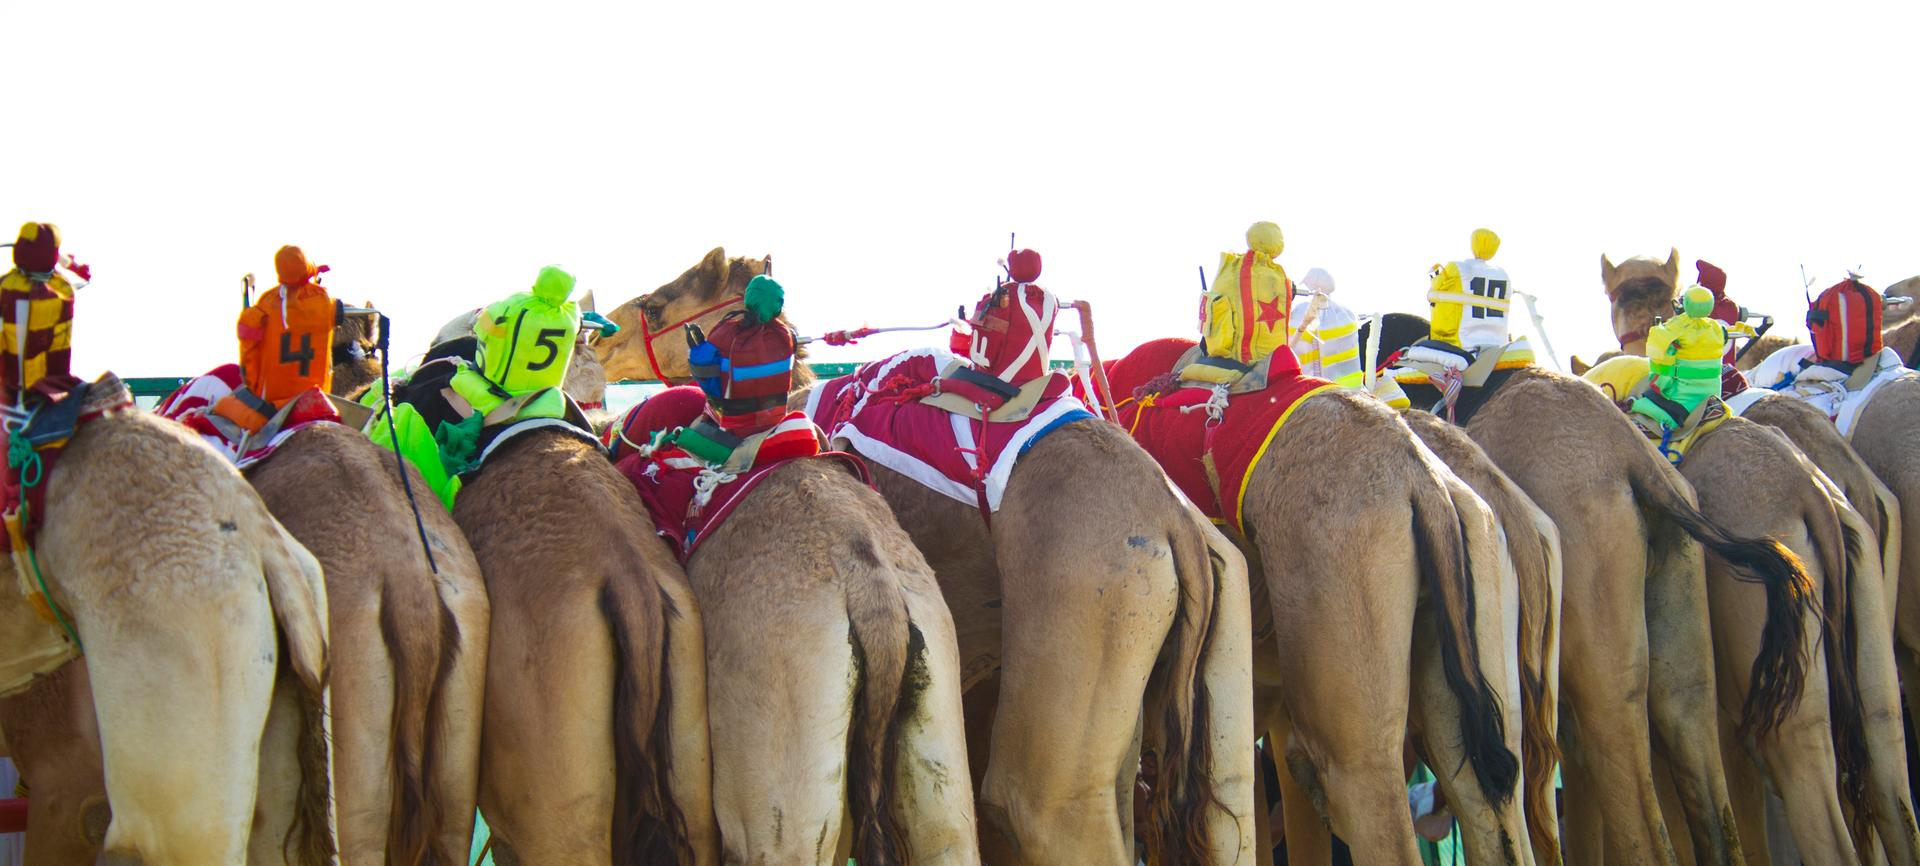 Camels ridden by mechanical robots race to the finish during a six kilometer race at the 12th International Camel Race in Kebd February 14, 2012. According to organizers, camel jockeys were replaced by mechanical robots since 2005 due to international pre